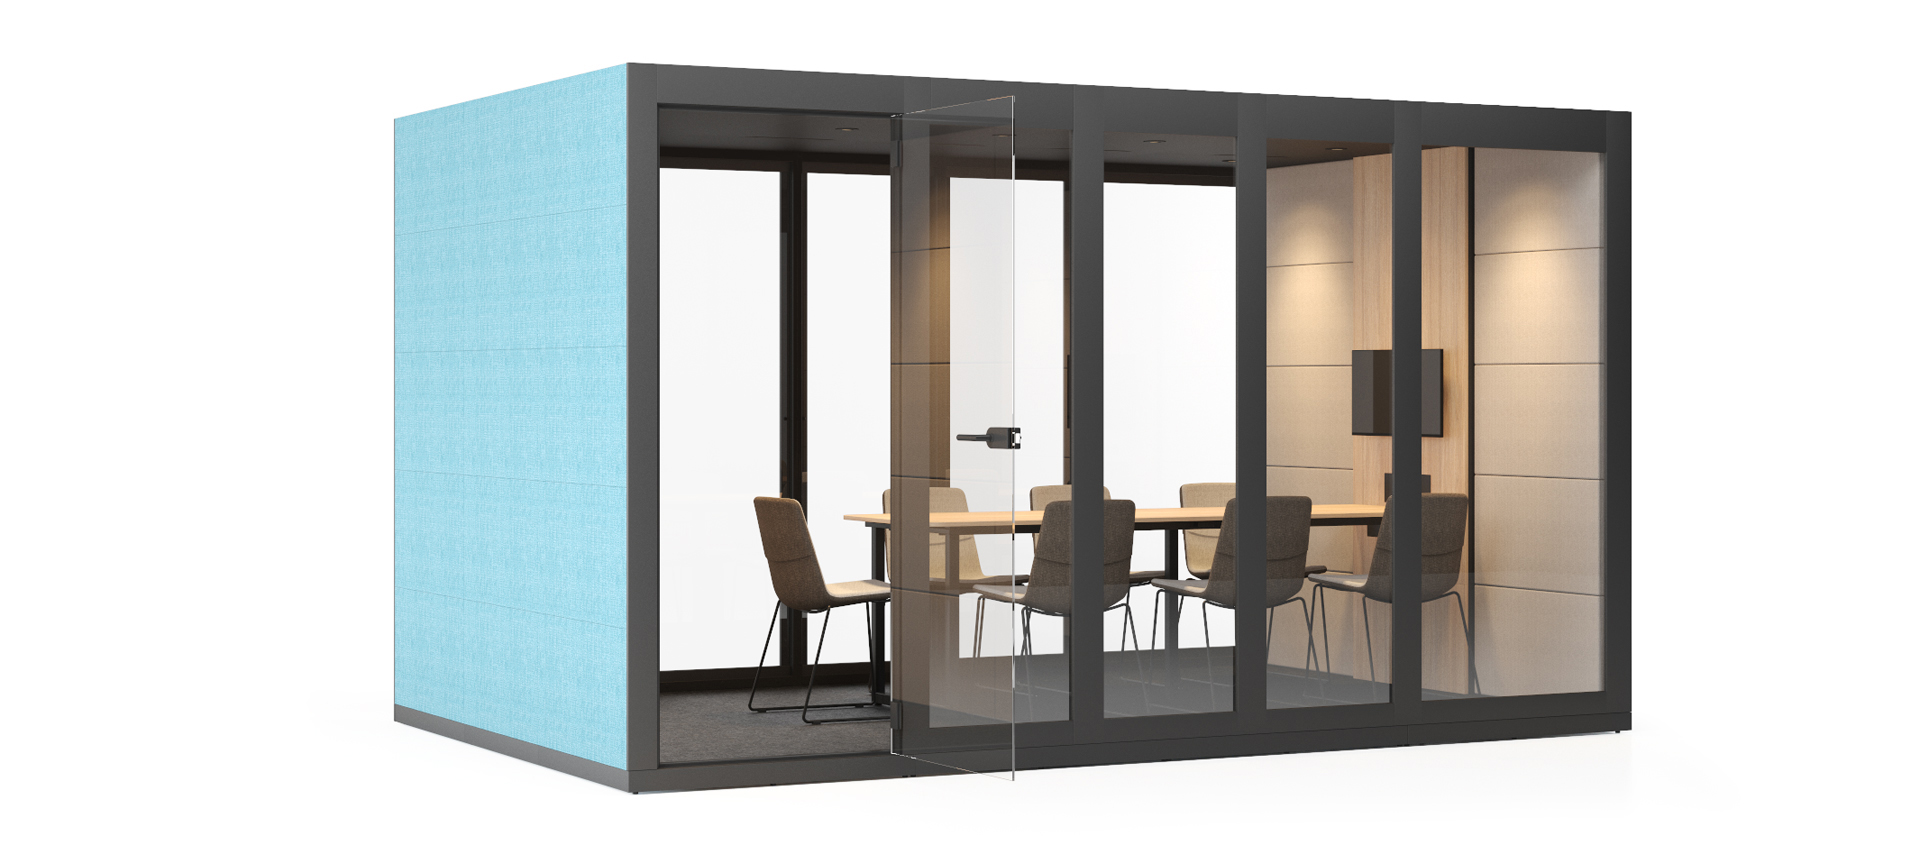 Narbutas Silent Room XL acoustic meeting pods